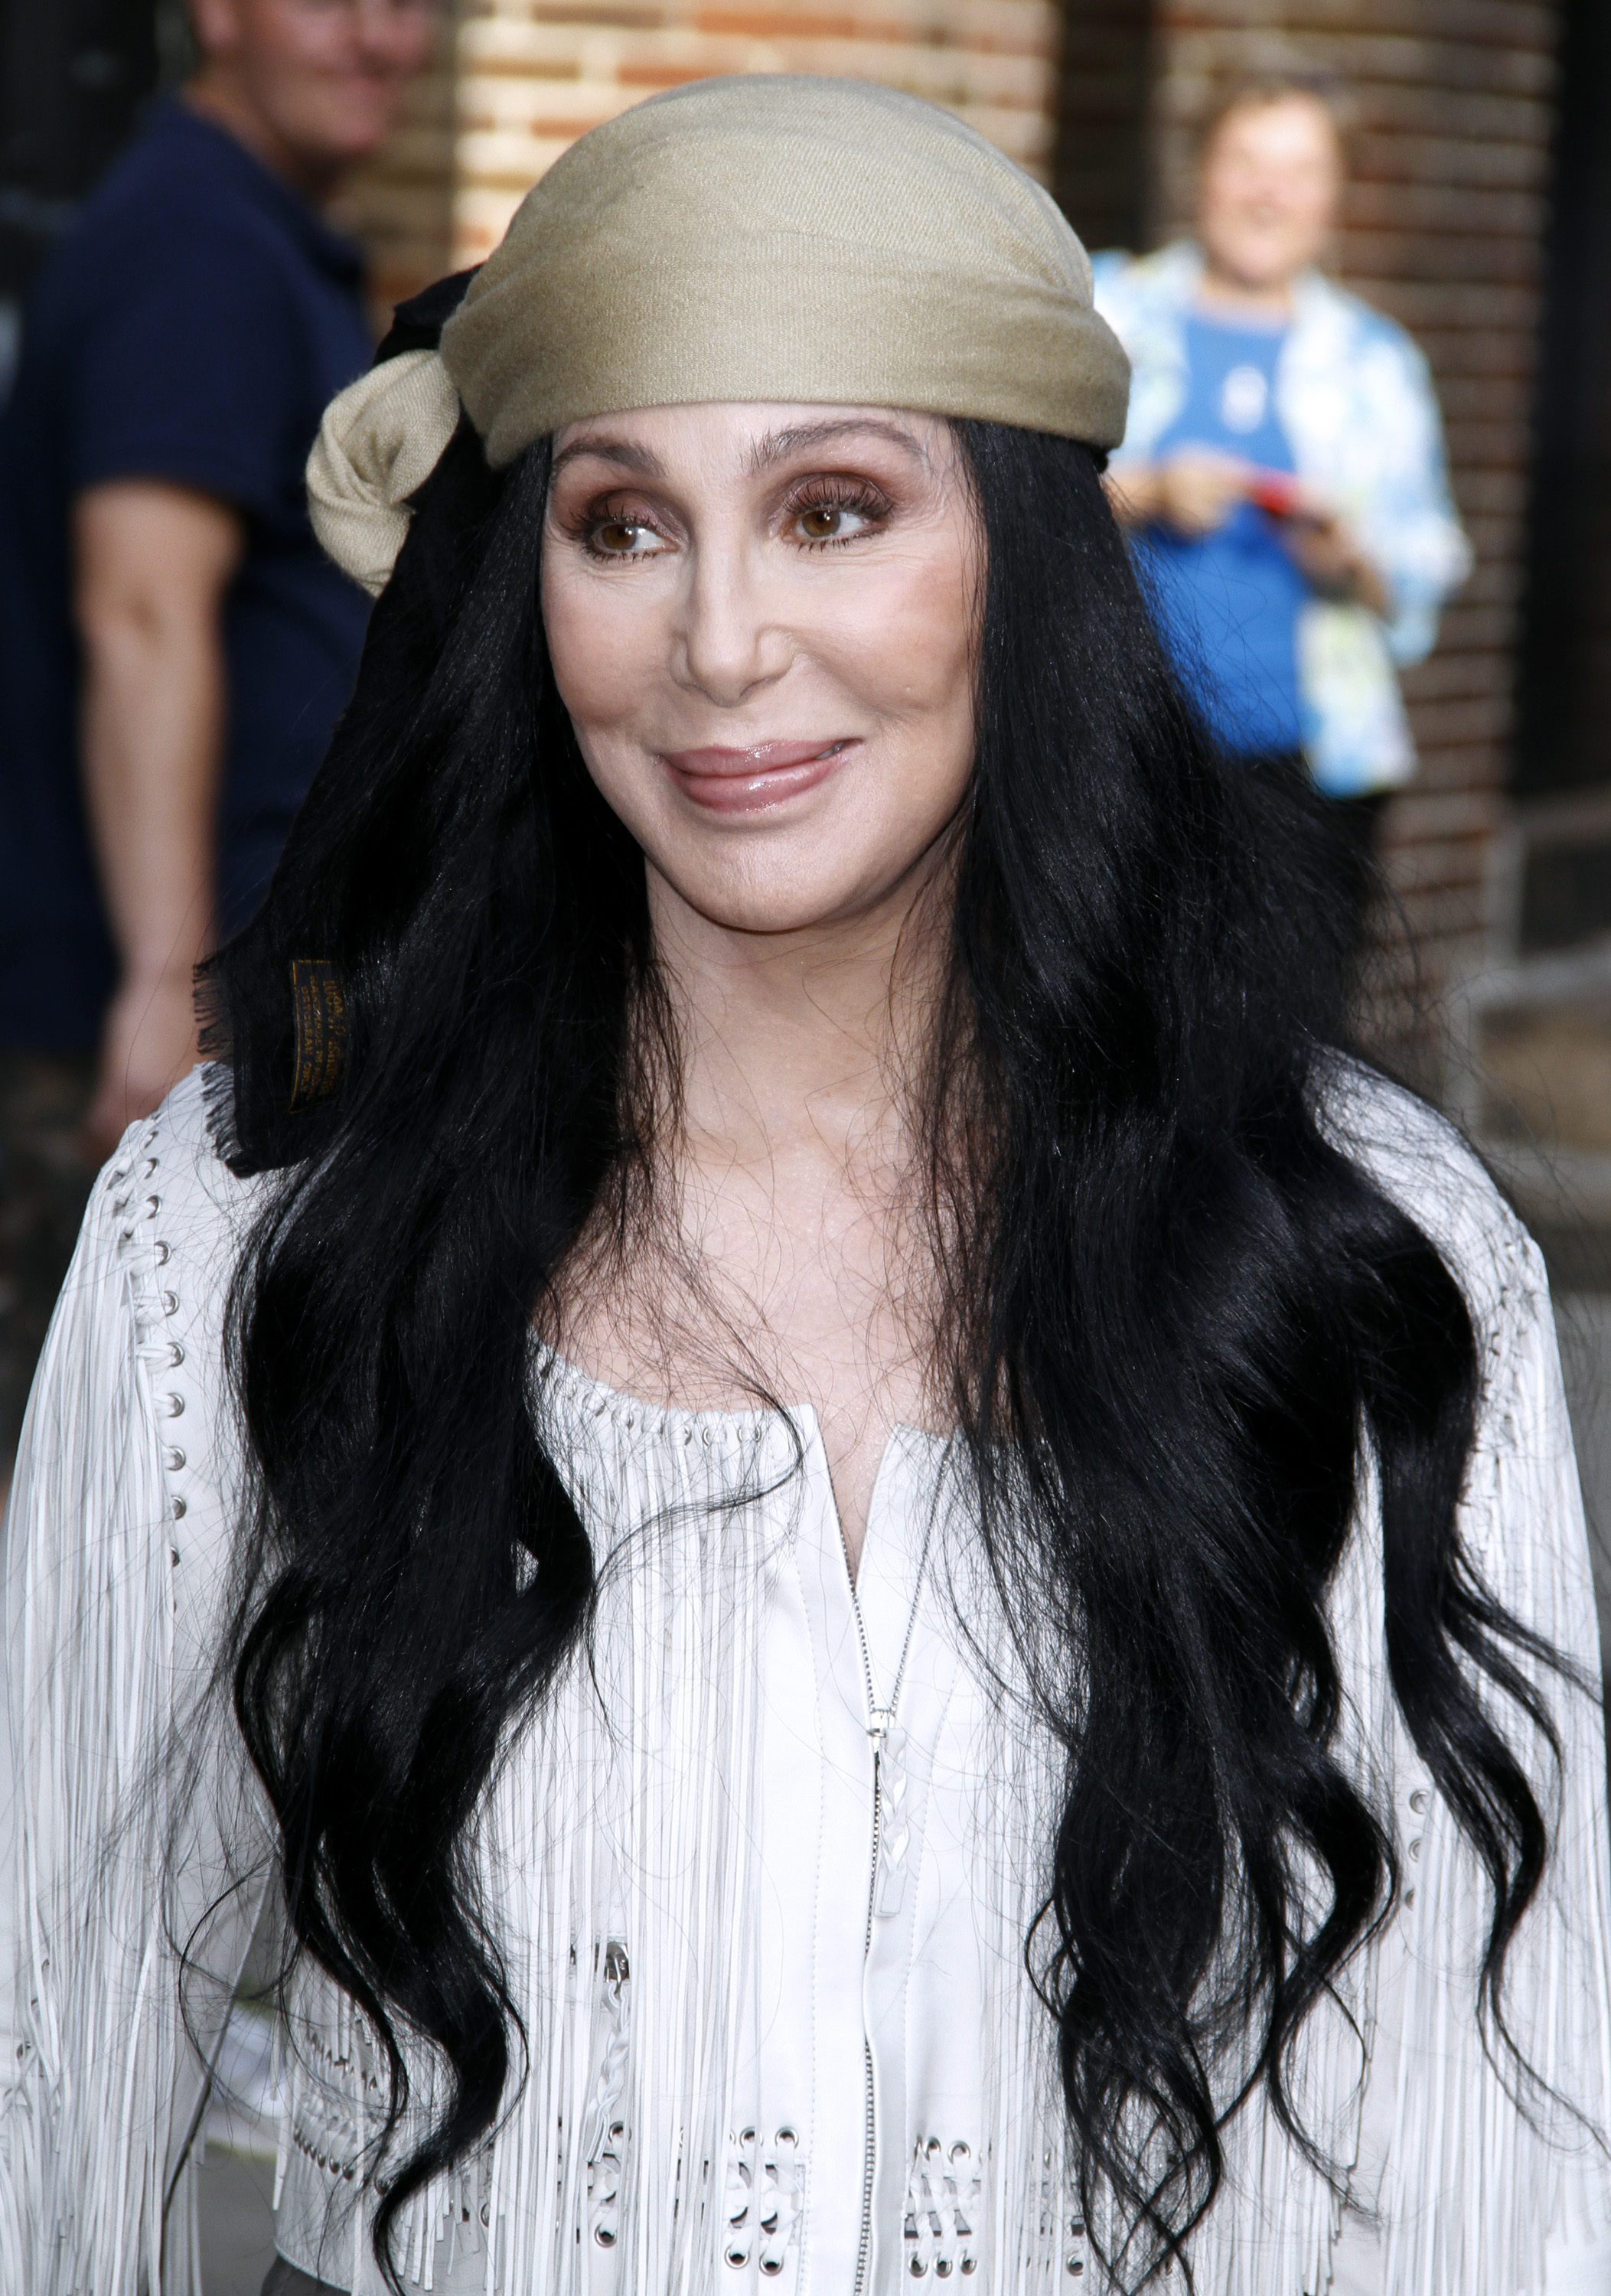 Cher attends the "Late Show with David Letterman" on May 6, 2015 in New York City | Source: Getty Images